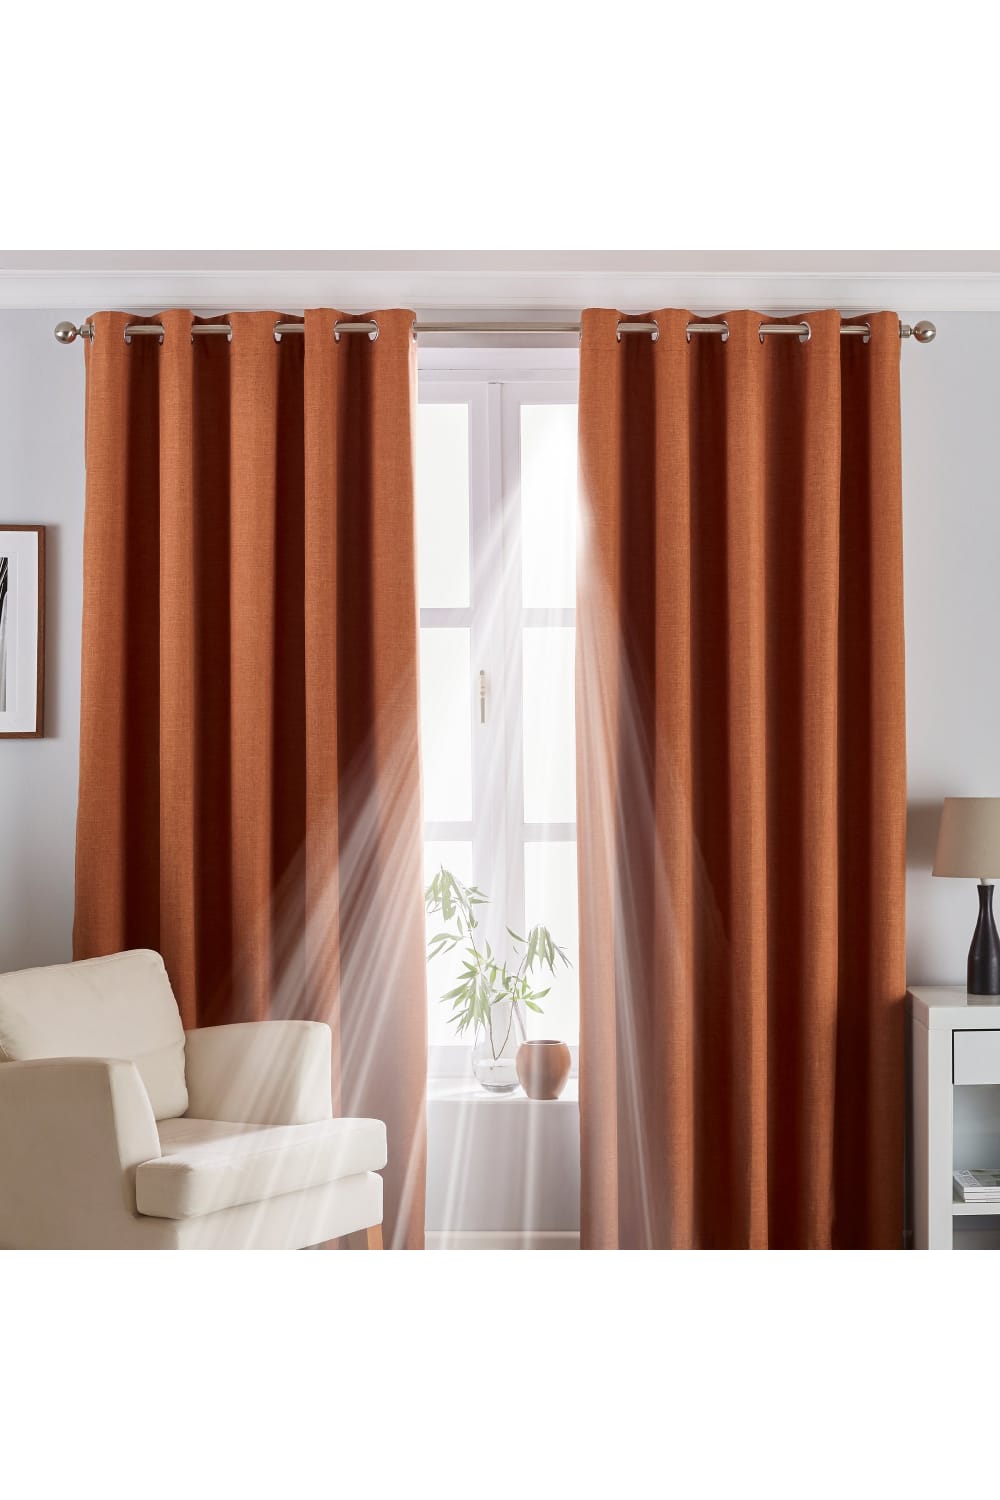 Riva Paoletti Eclipse Ringtop Eyelet Curtains (Orange) (66 x 90 in)